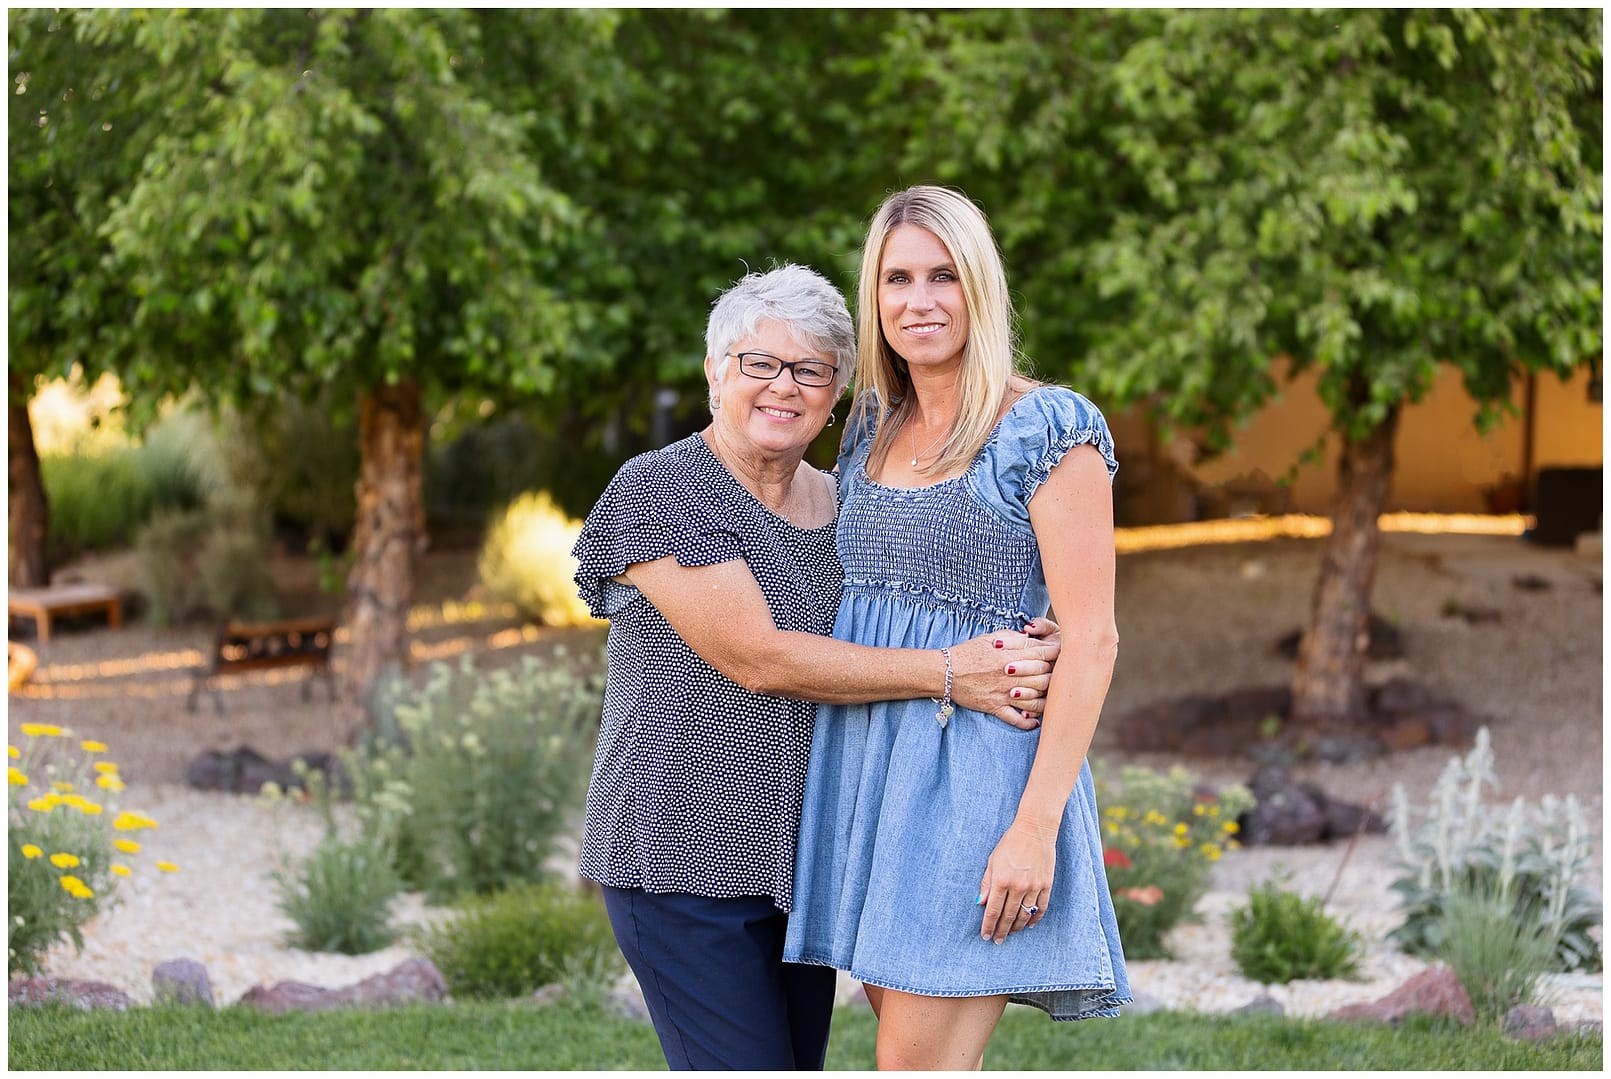 Mom & older daughter stand in yard smiling. Photo by Tiffany Hix Photography.